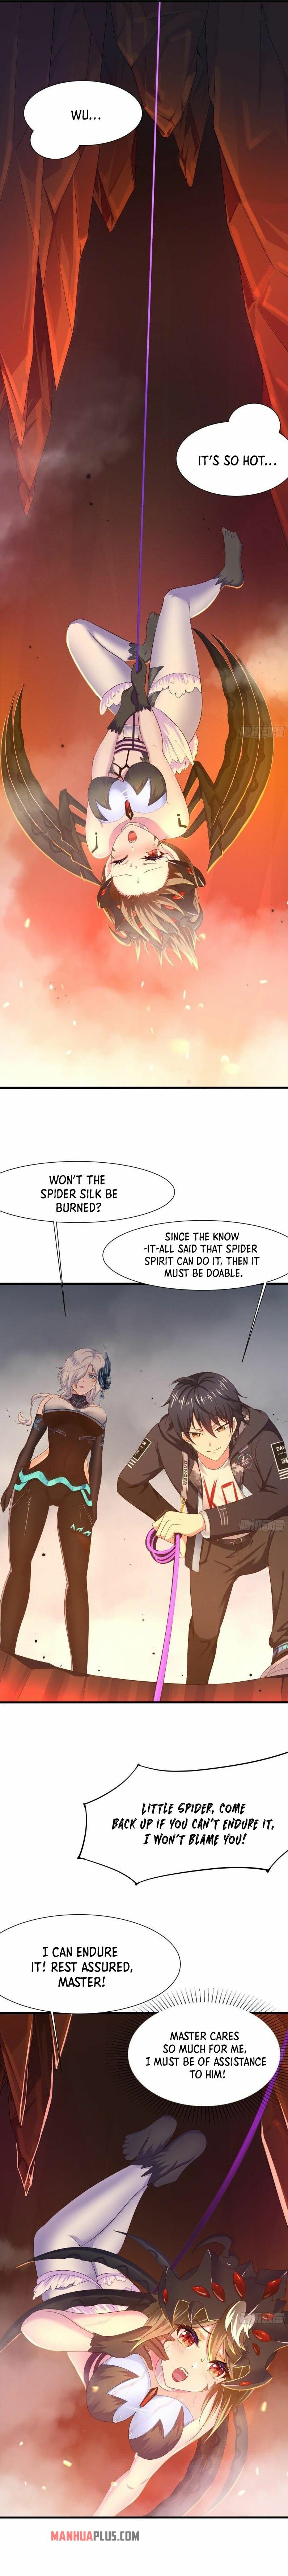 I Opened A Harem In Hell - Page 1